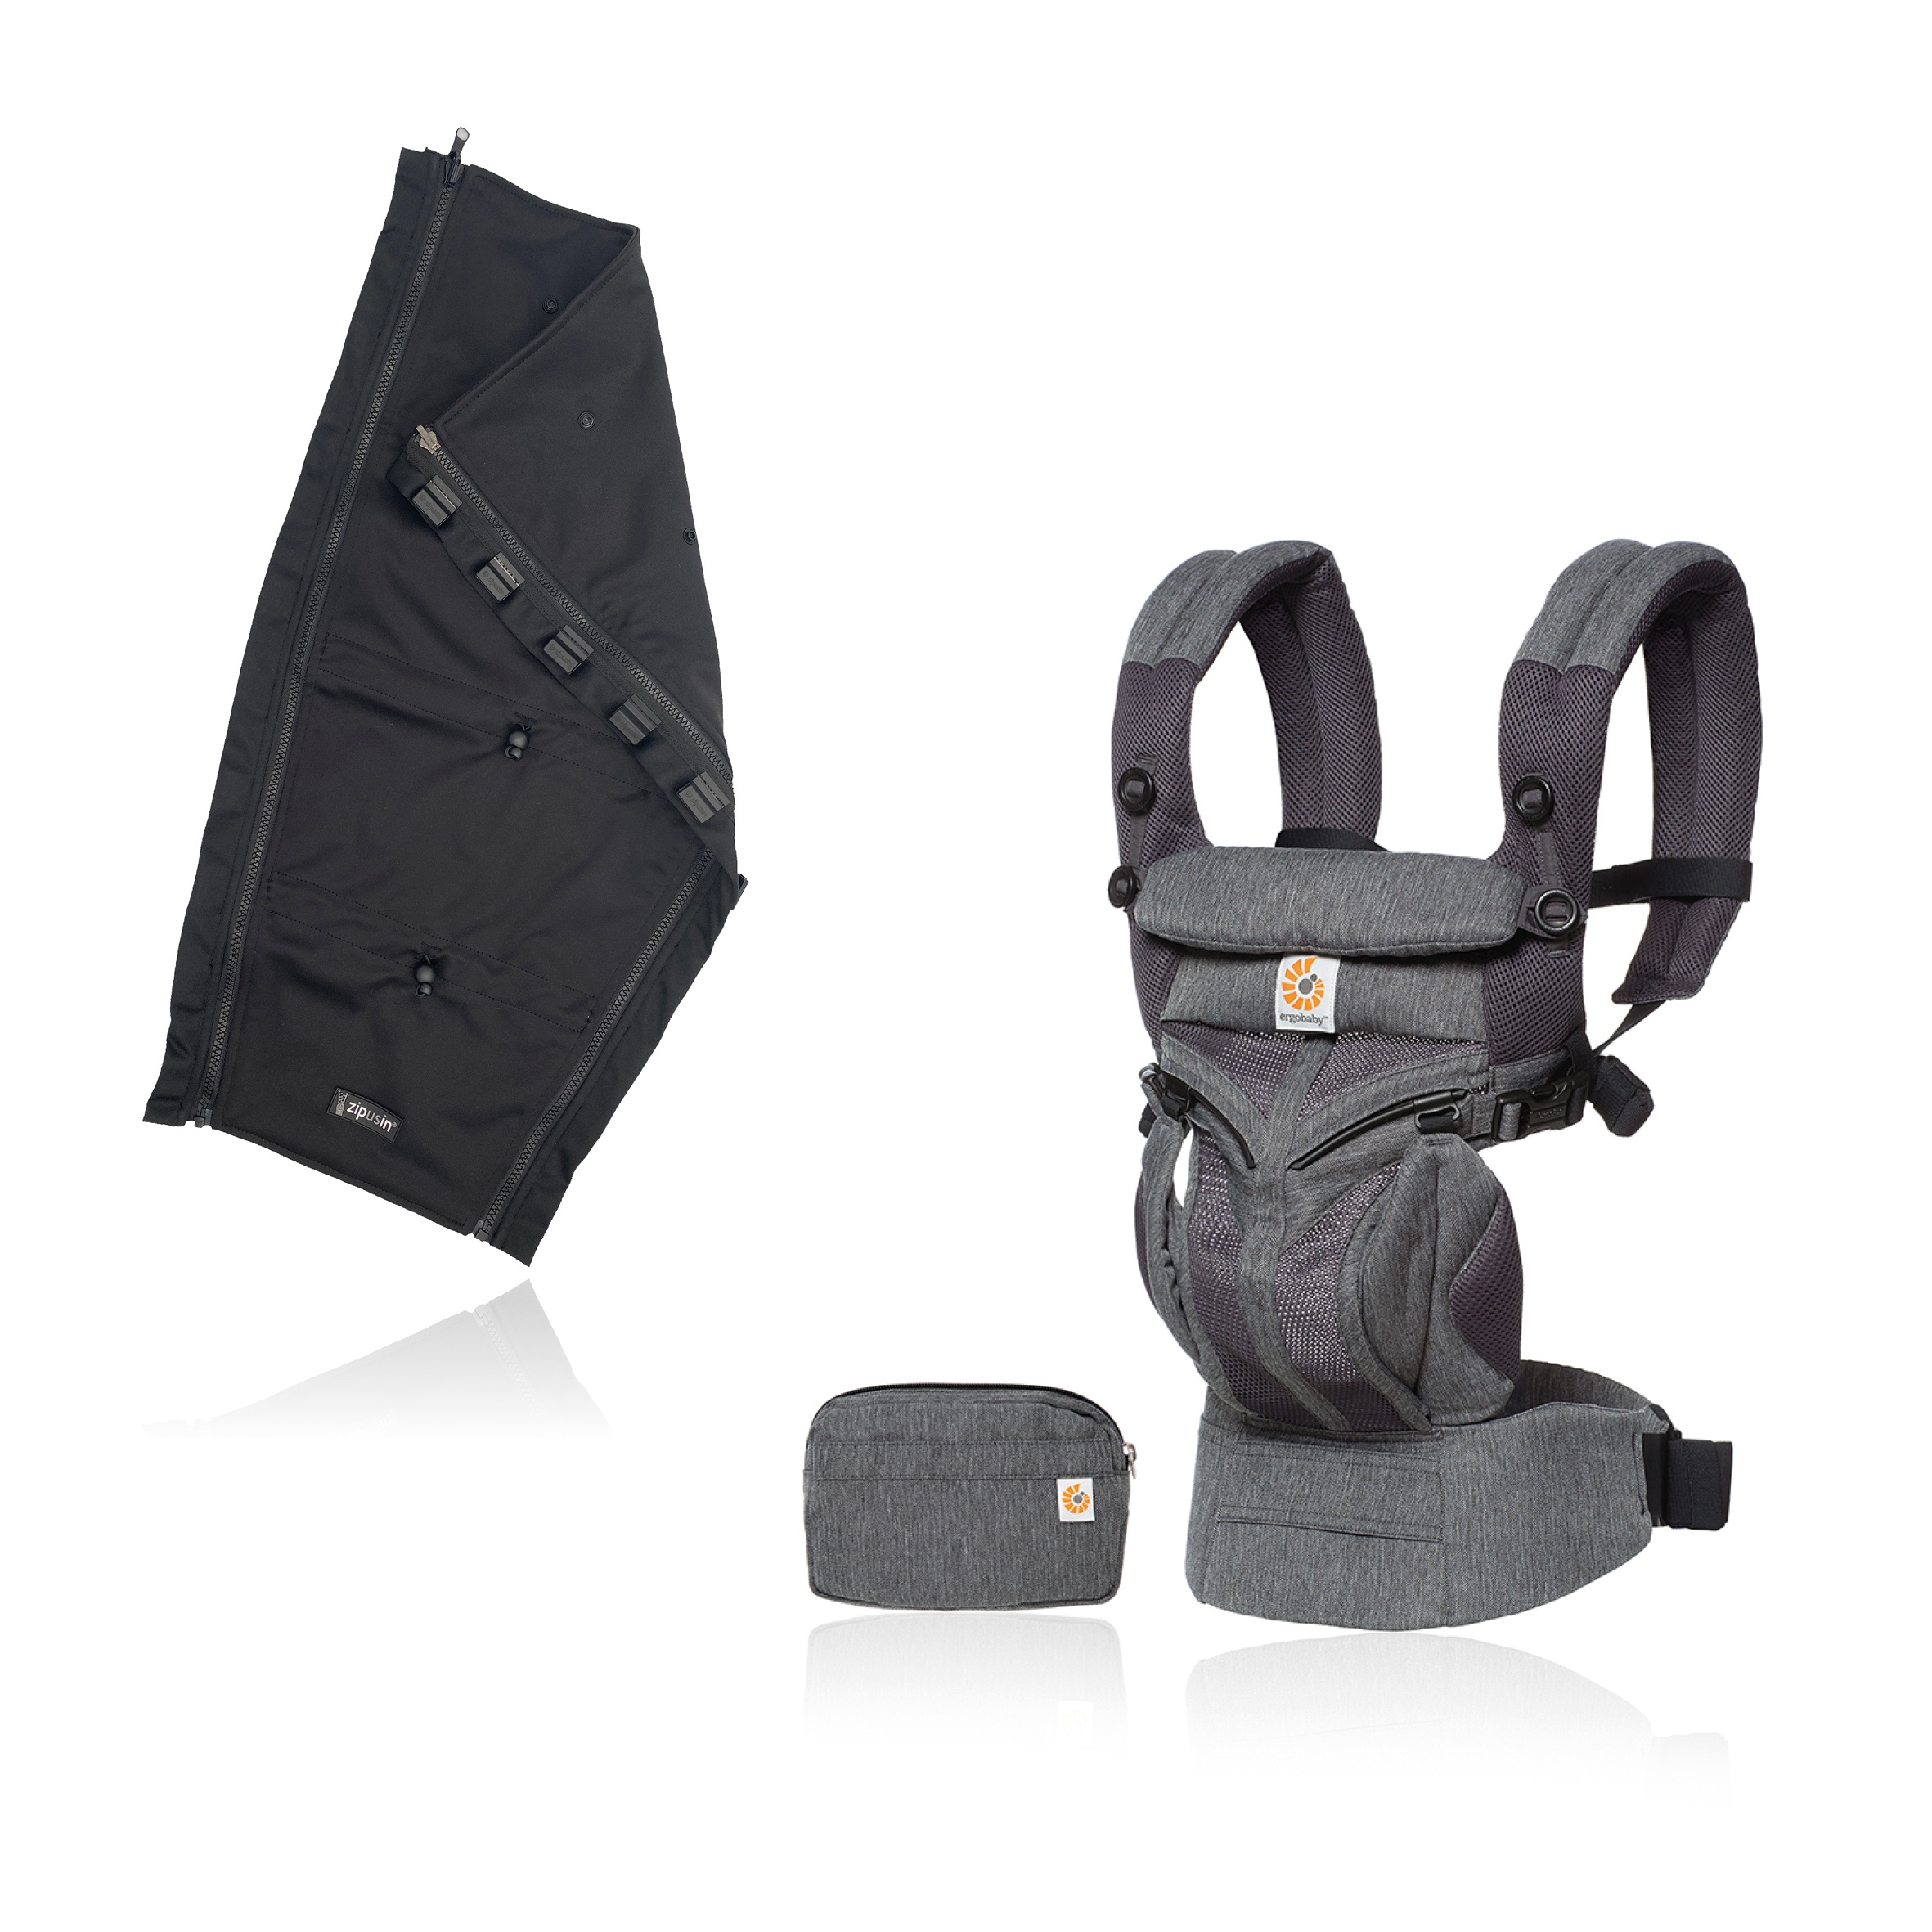 Half Price Universal Jacket Expander Panel With Ergobaby Omni 360 Baby Carrier – Classic Weave